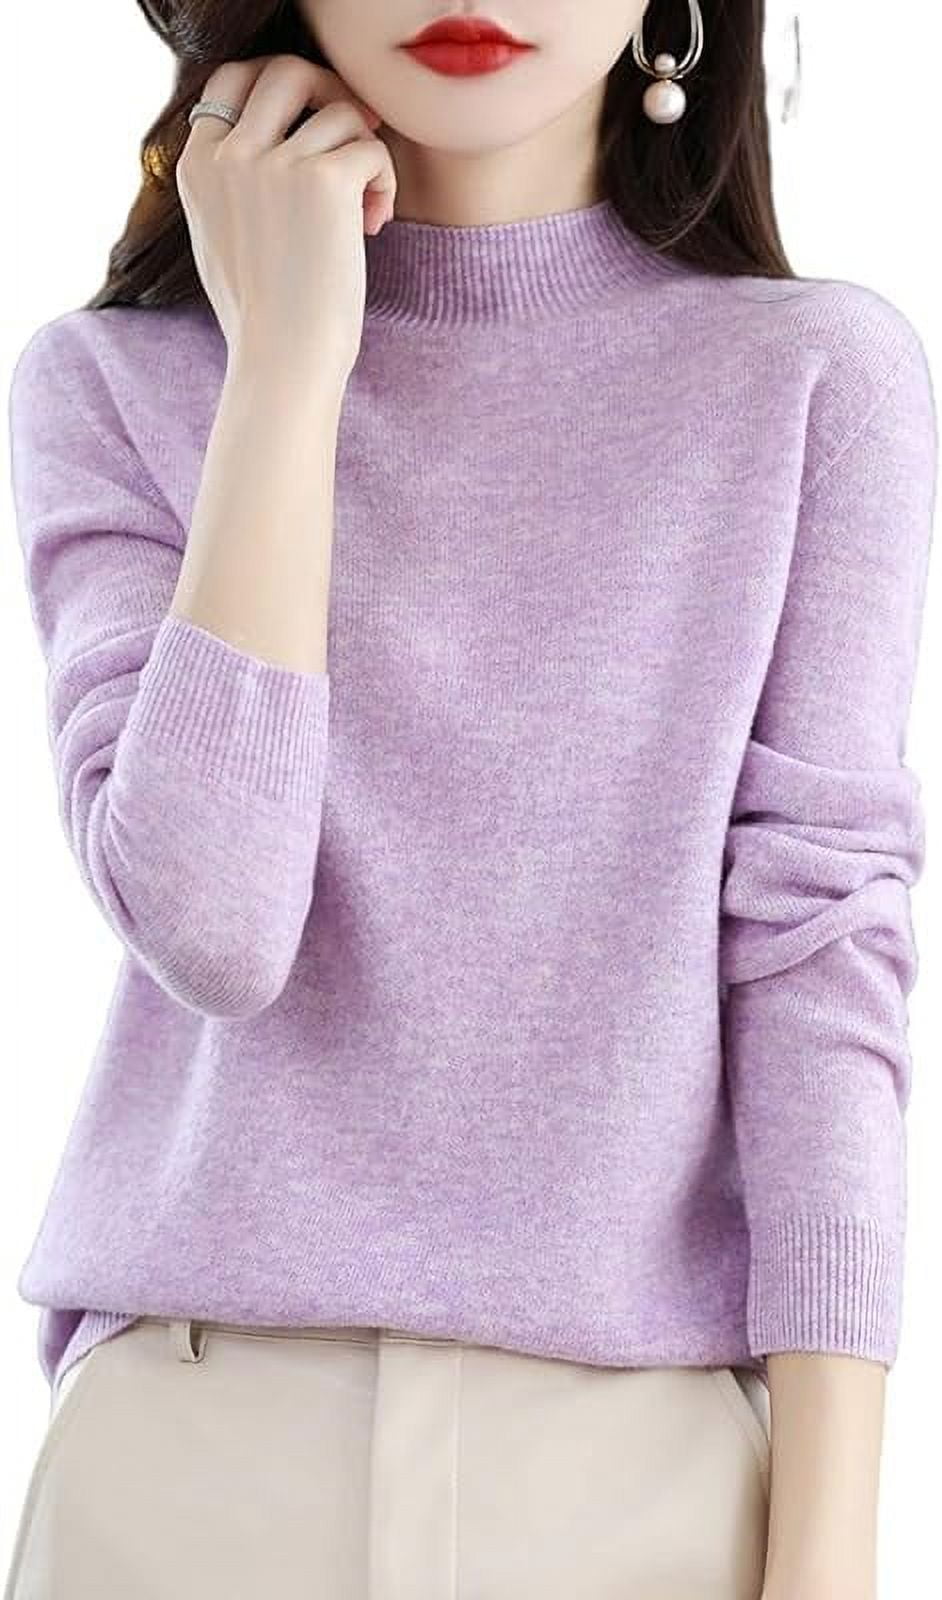 Cashmere Sweaters for Women, Womens Cashmere Sweater, 100% Cashmere ...